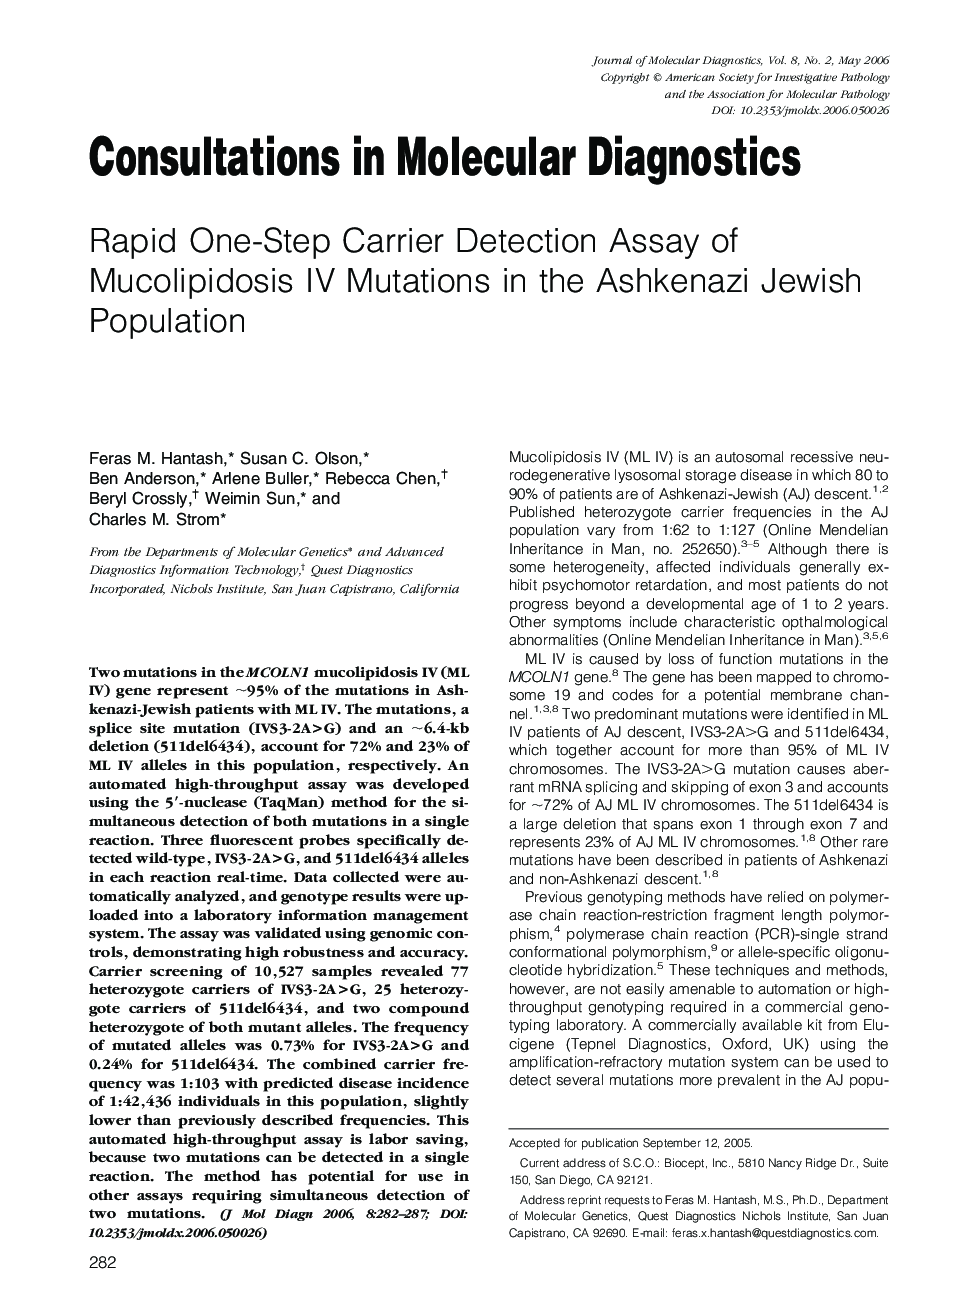 Rapid One-Step Carrier Detection Assay of Mucolipidosis IV Mutations in the Ashkenazi Jewish Population 